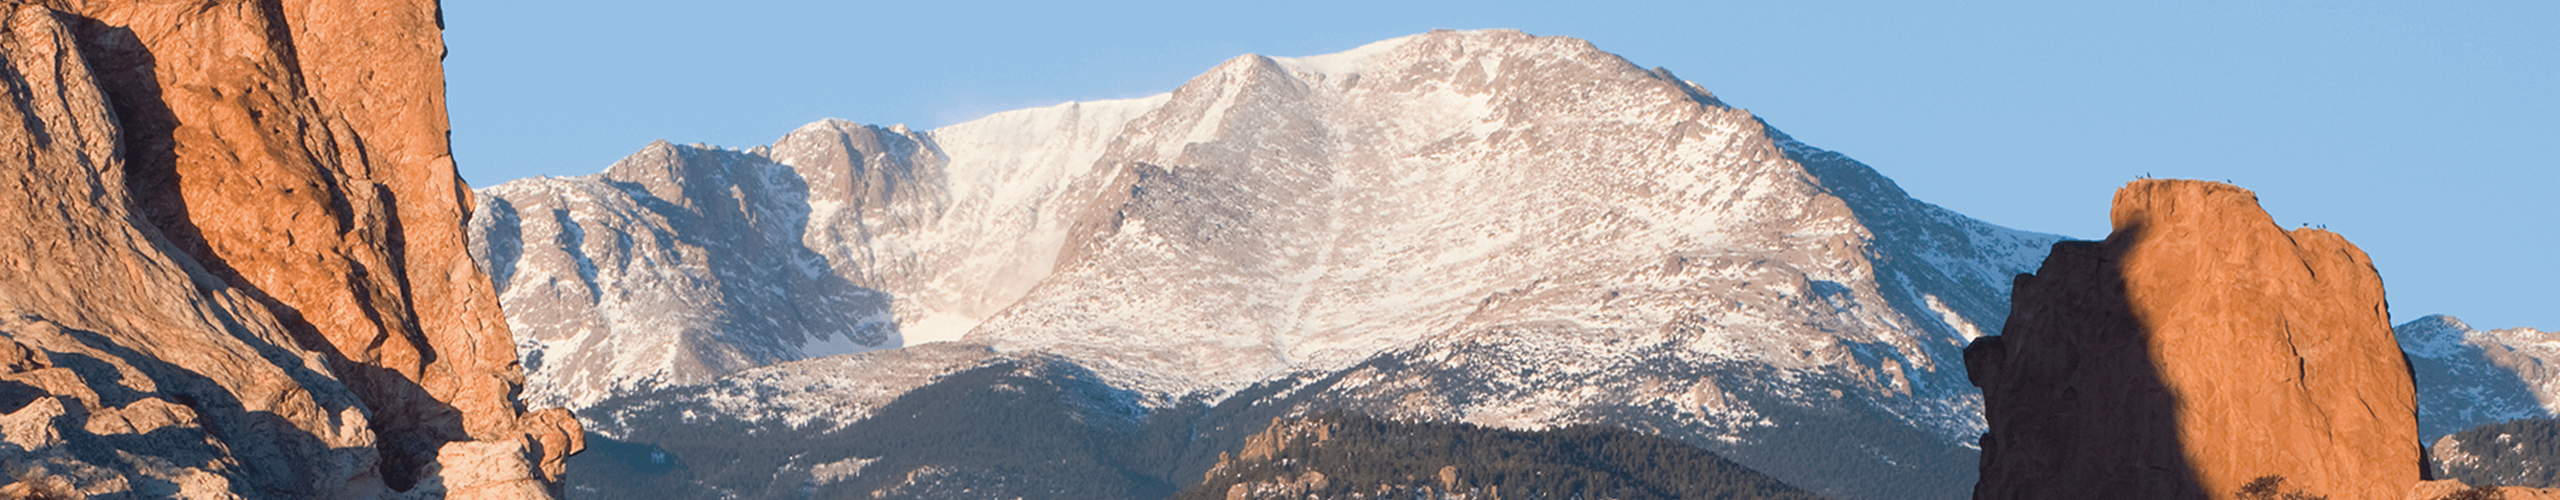 Image of the Pikes Peak mountains